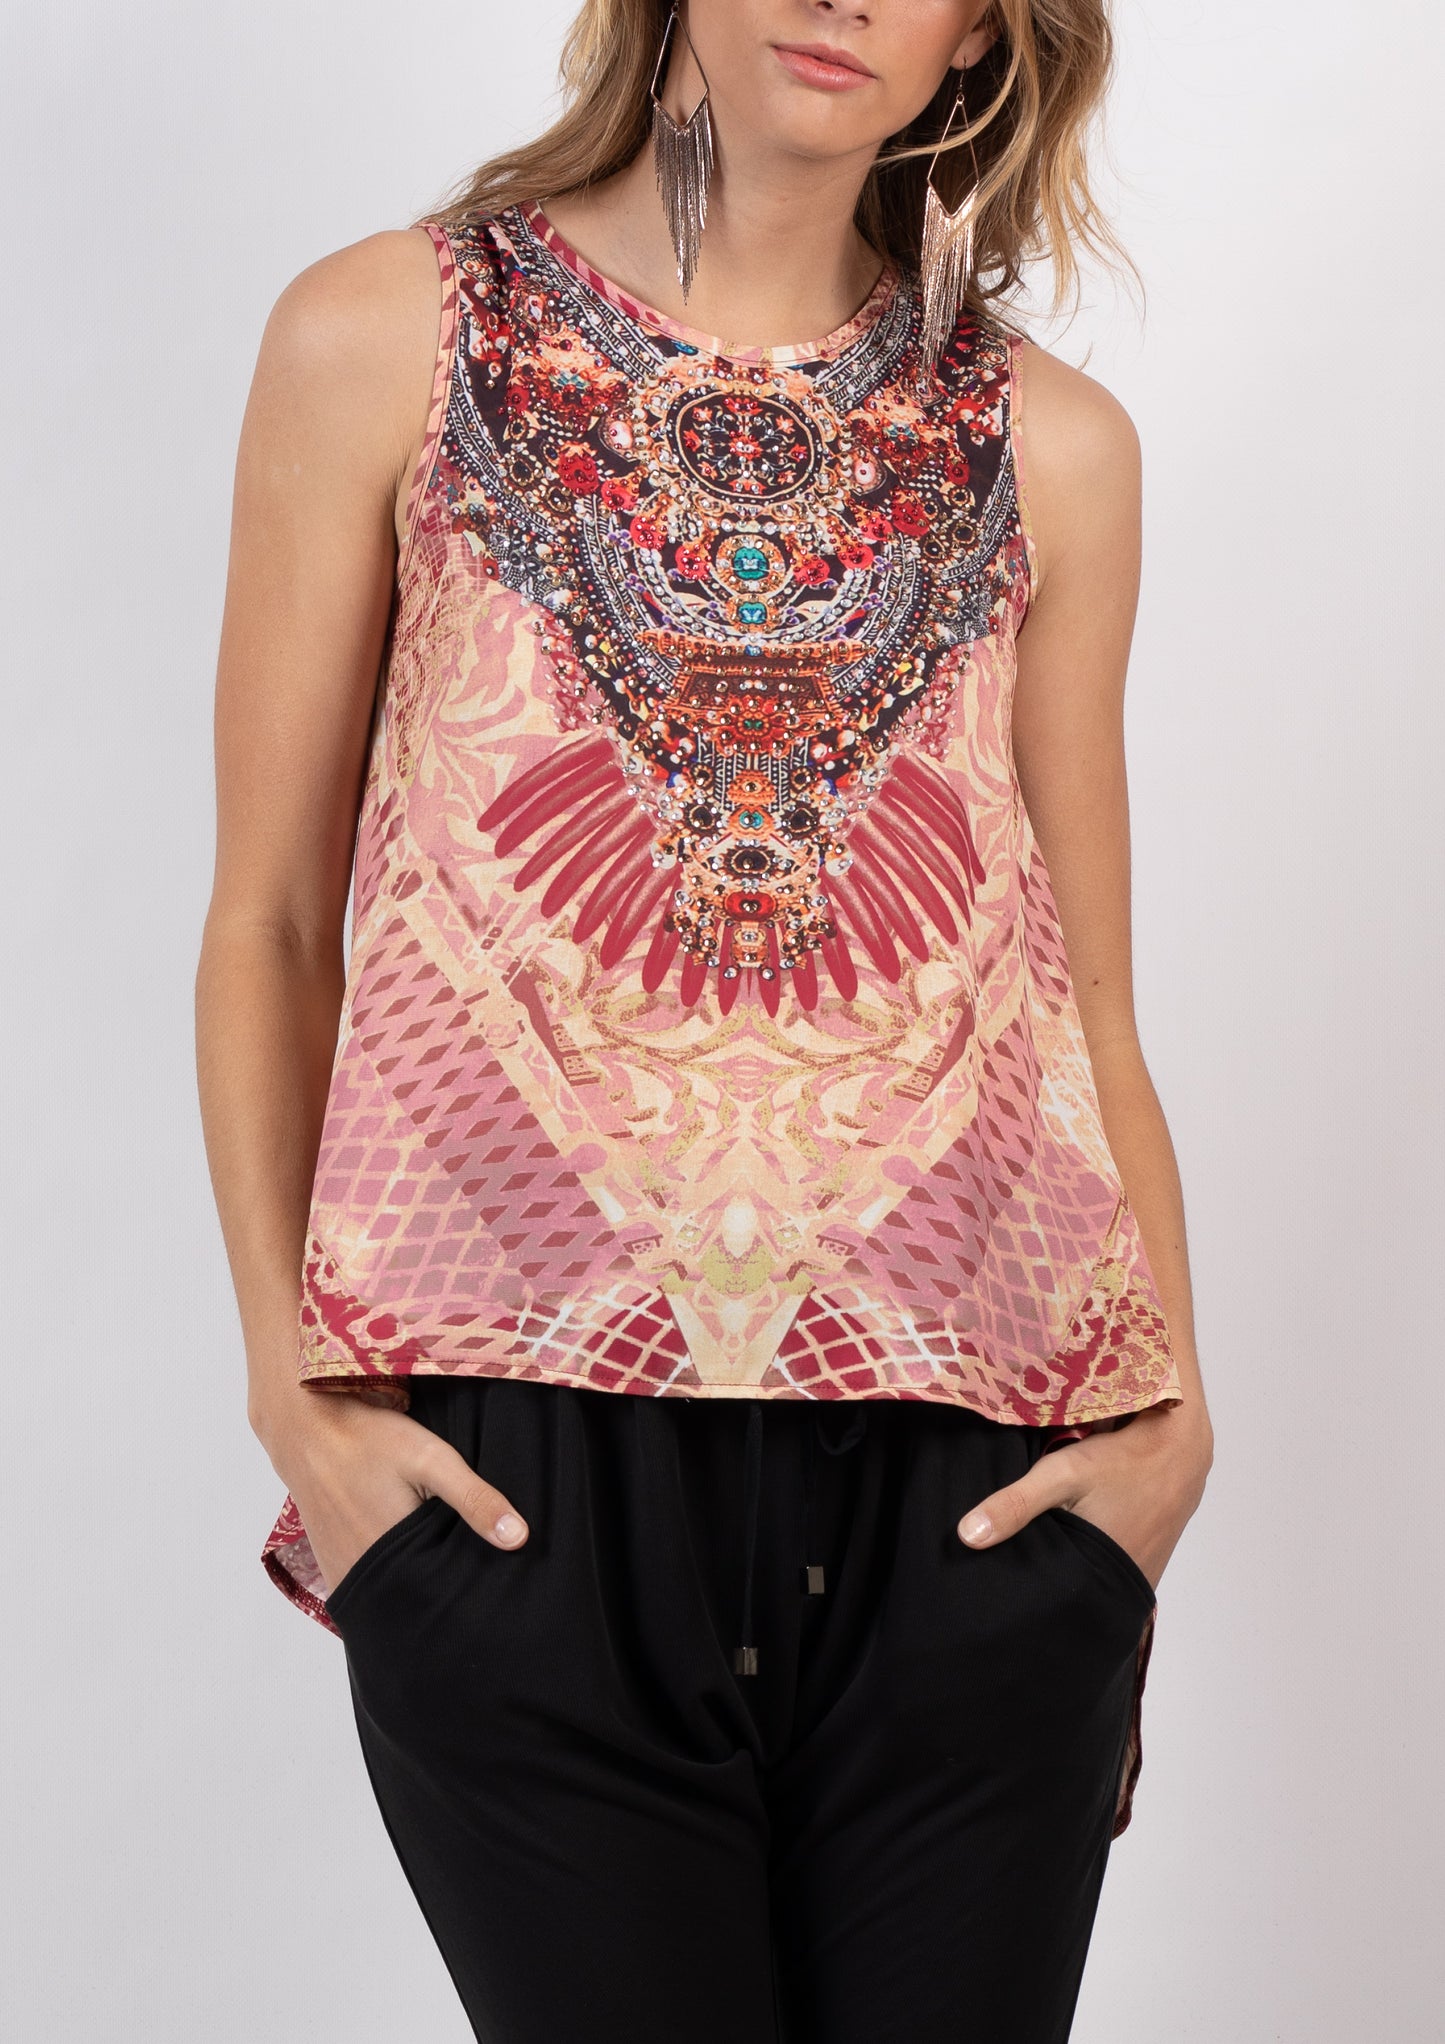 HS12353-14SS Aztec Printed Embellished Top (Pack)